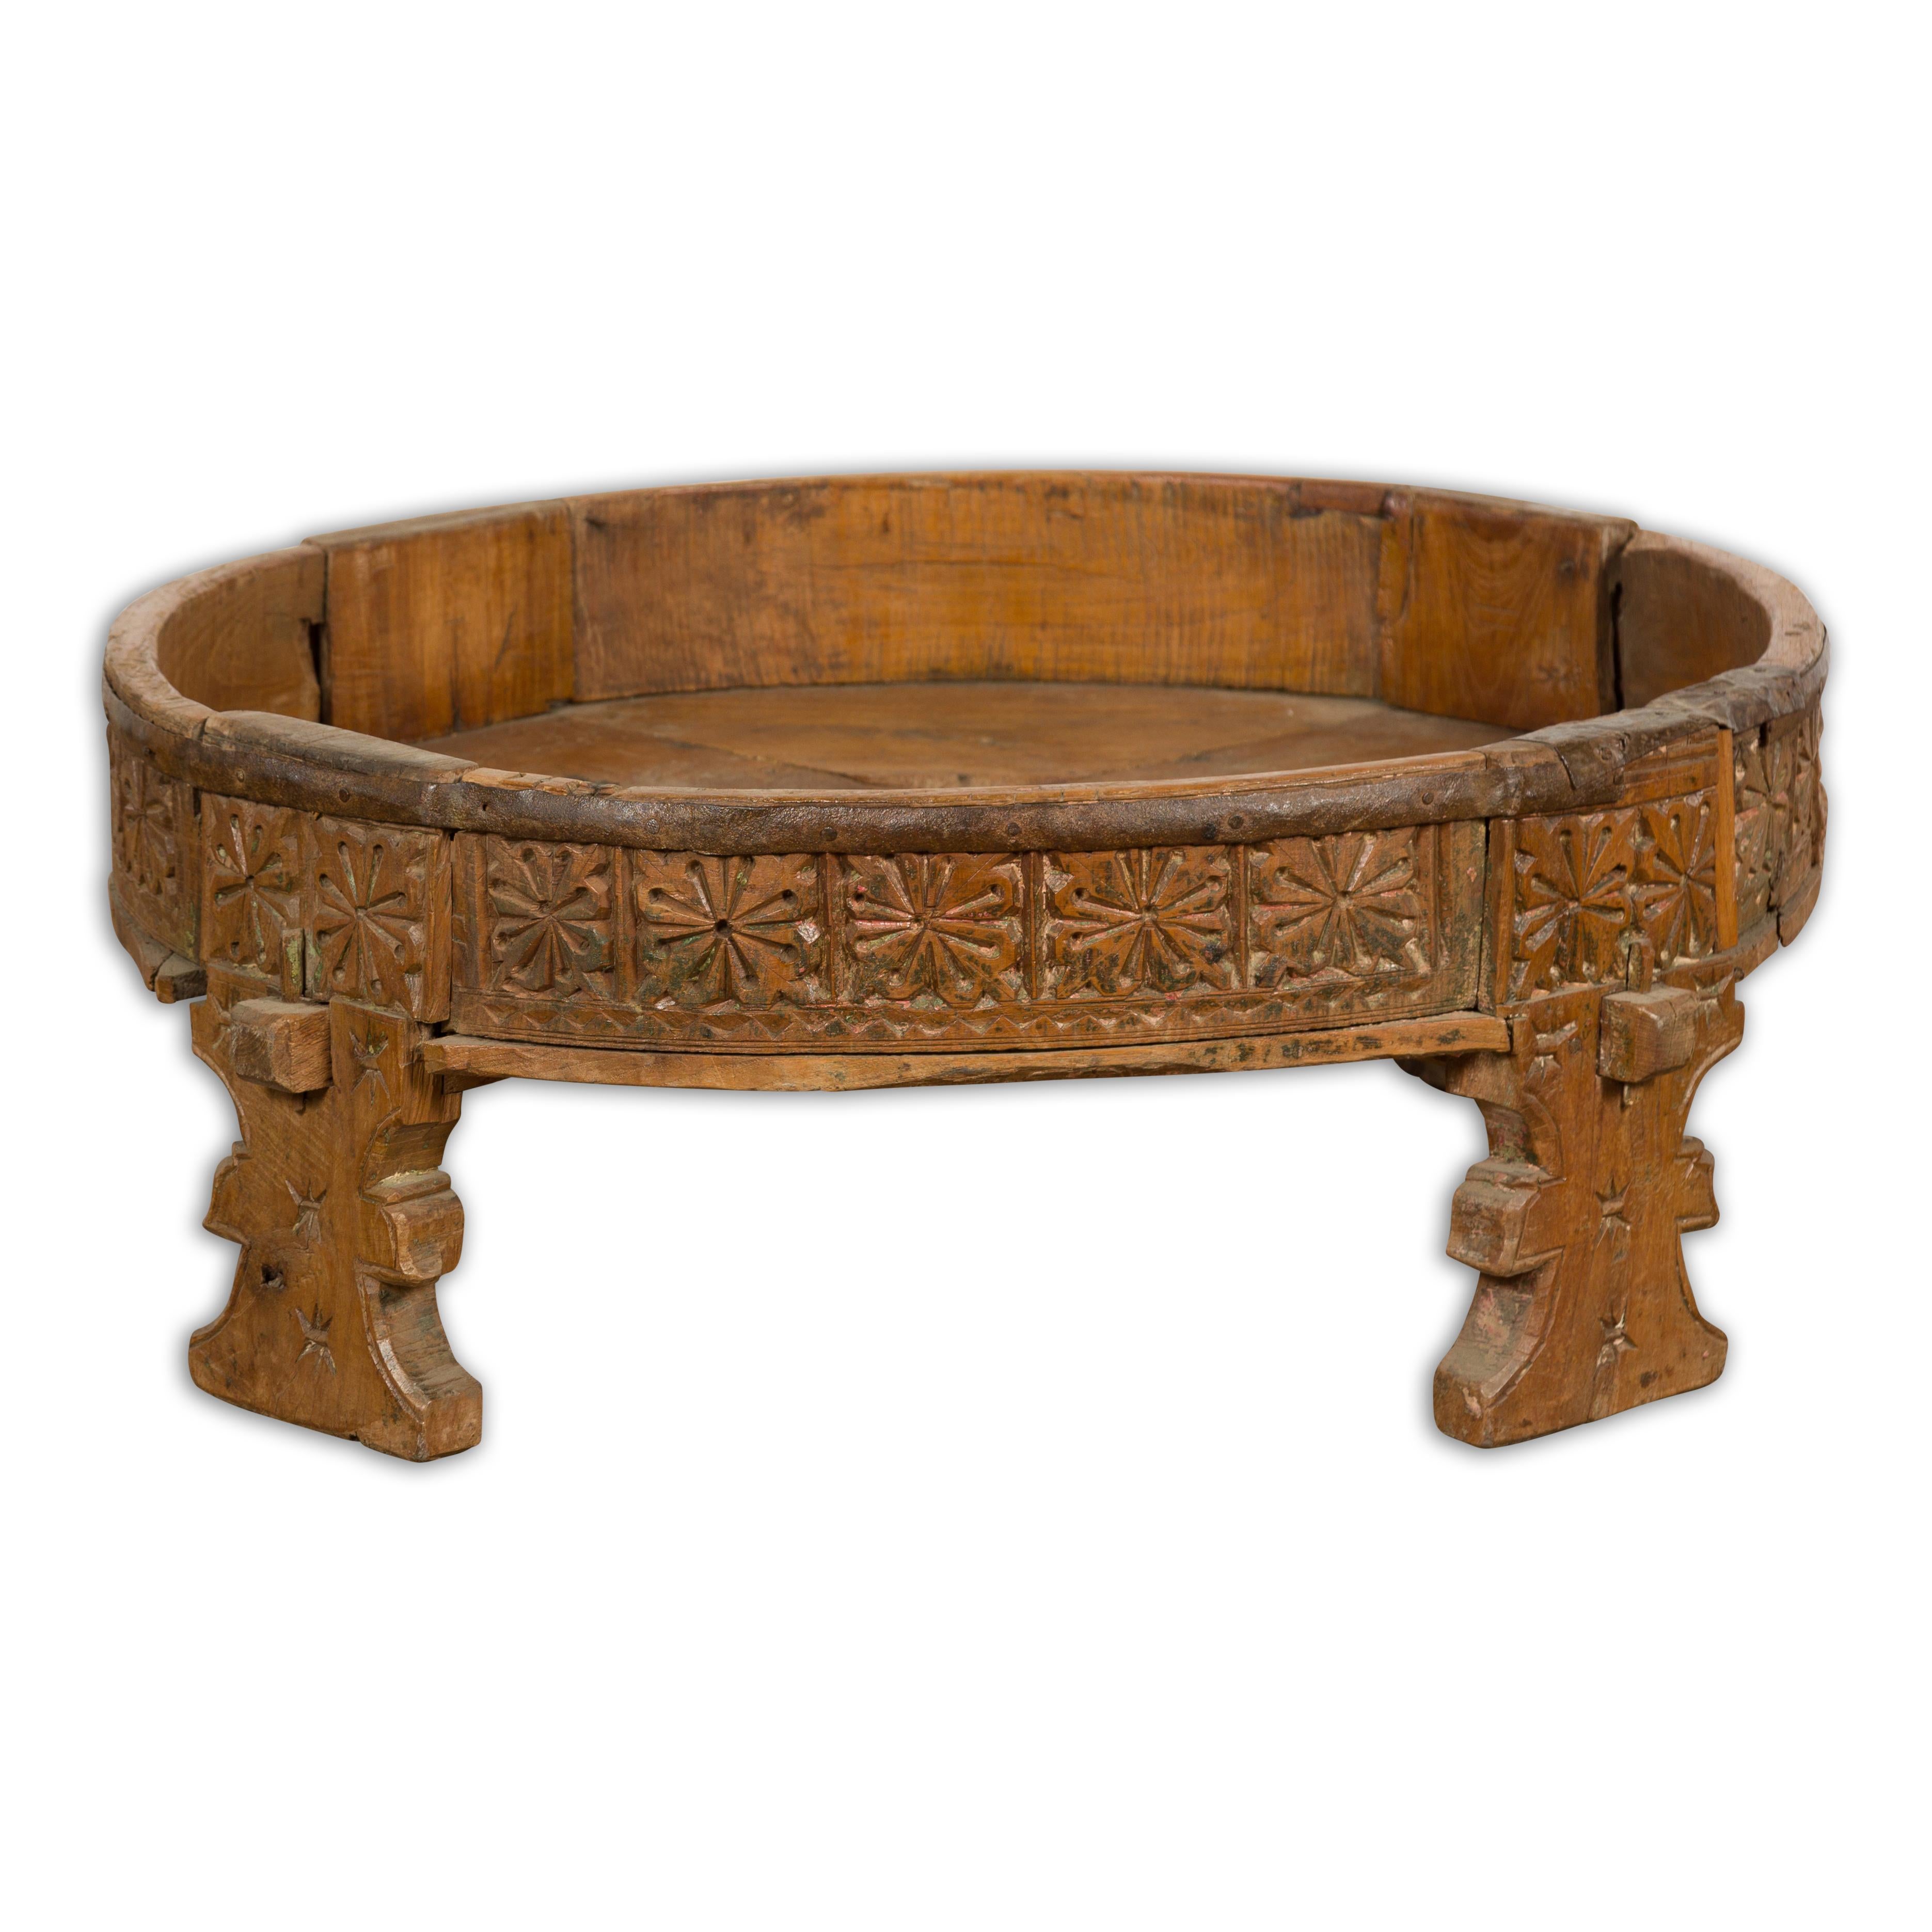 Indian Tribal 1920s Teak Chakki Grinding Table with Geometric Hand-Carved Motifs For Sale 11